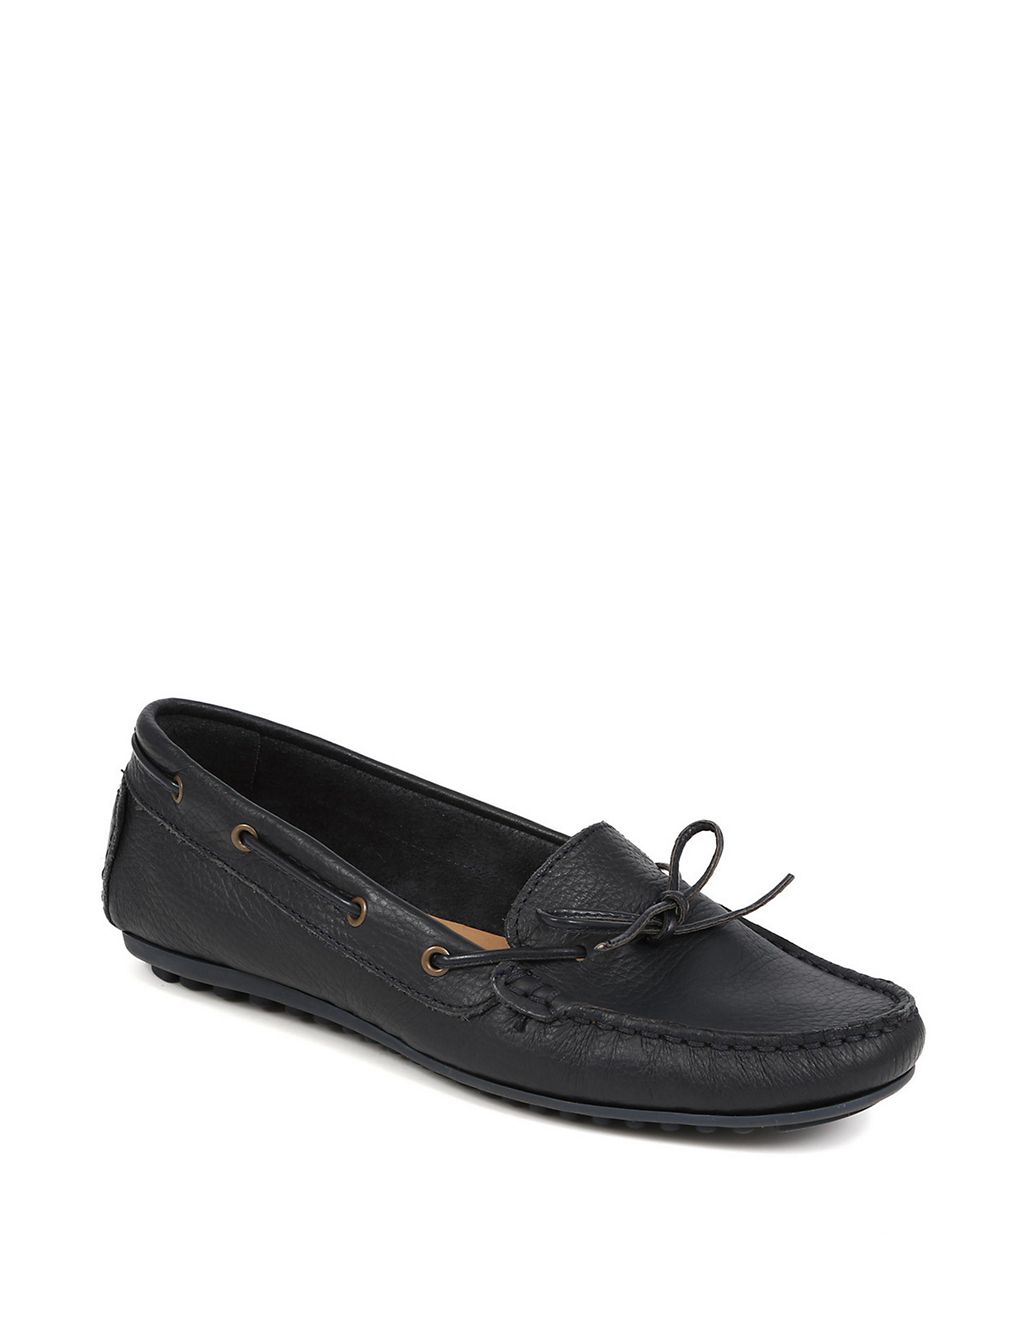 Leather Bow Slip On Flat Boat Shoes 1 of 6